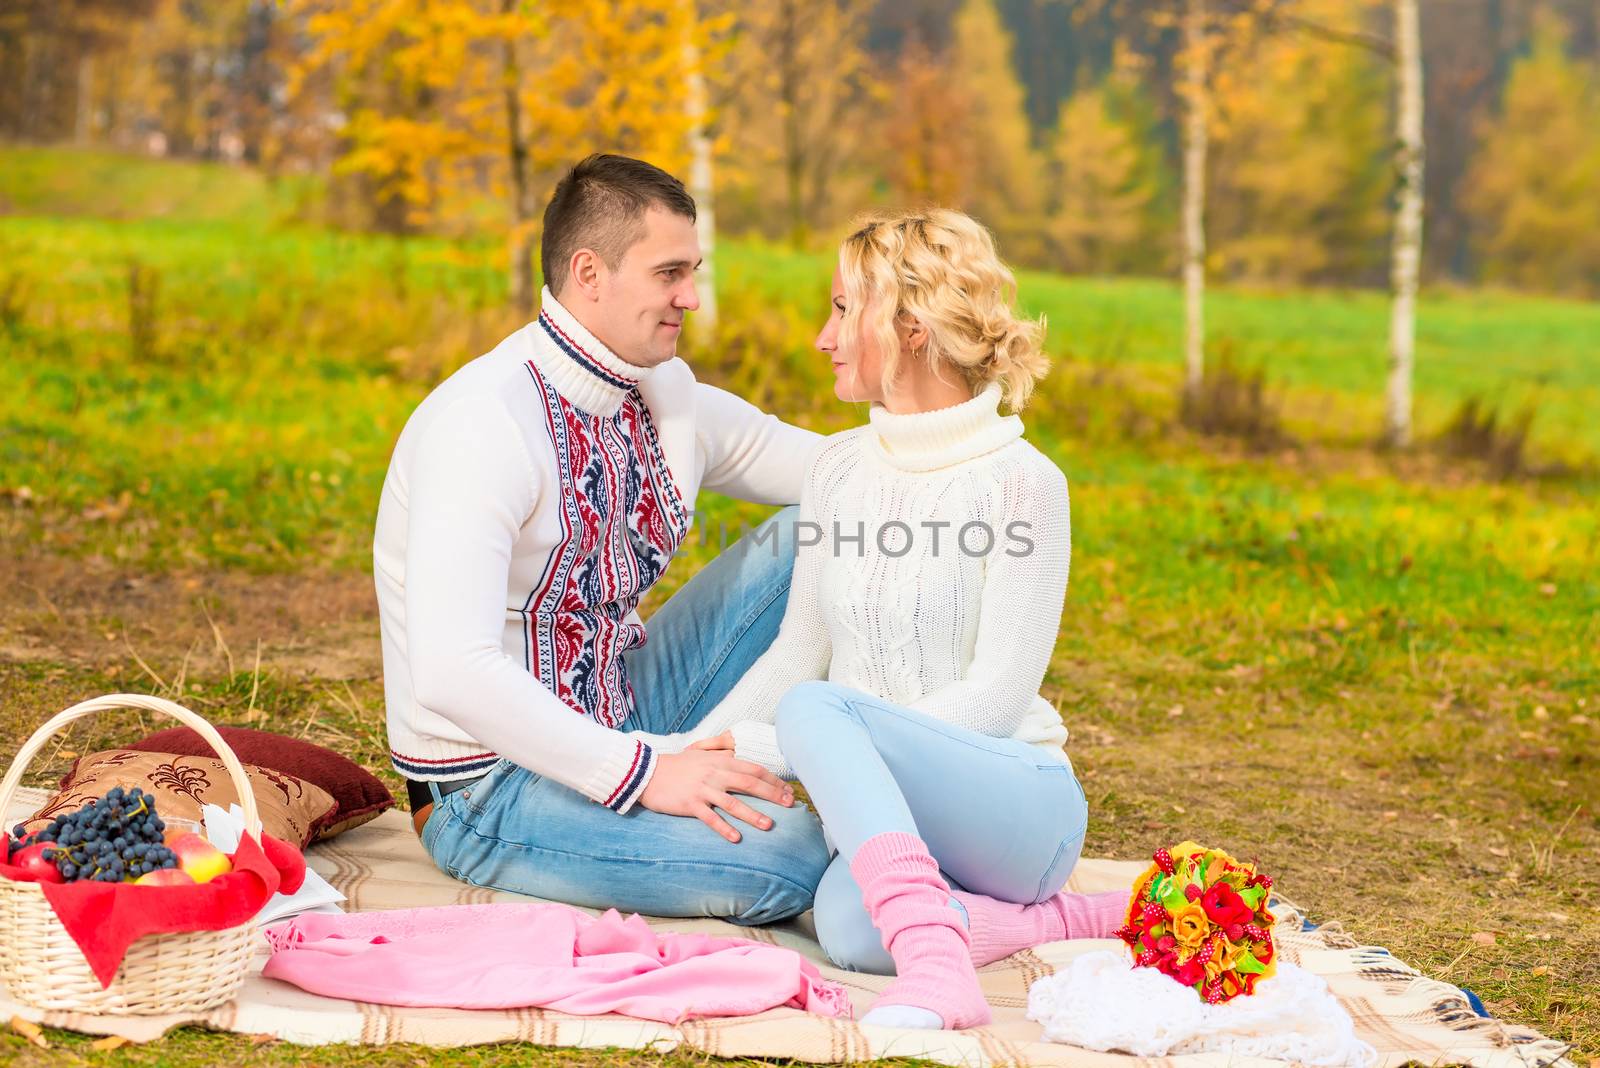 married couple looking into each other's eyes in the park